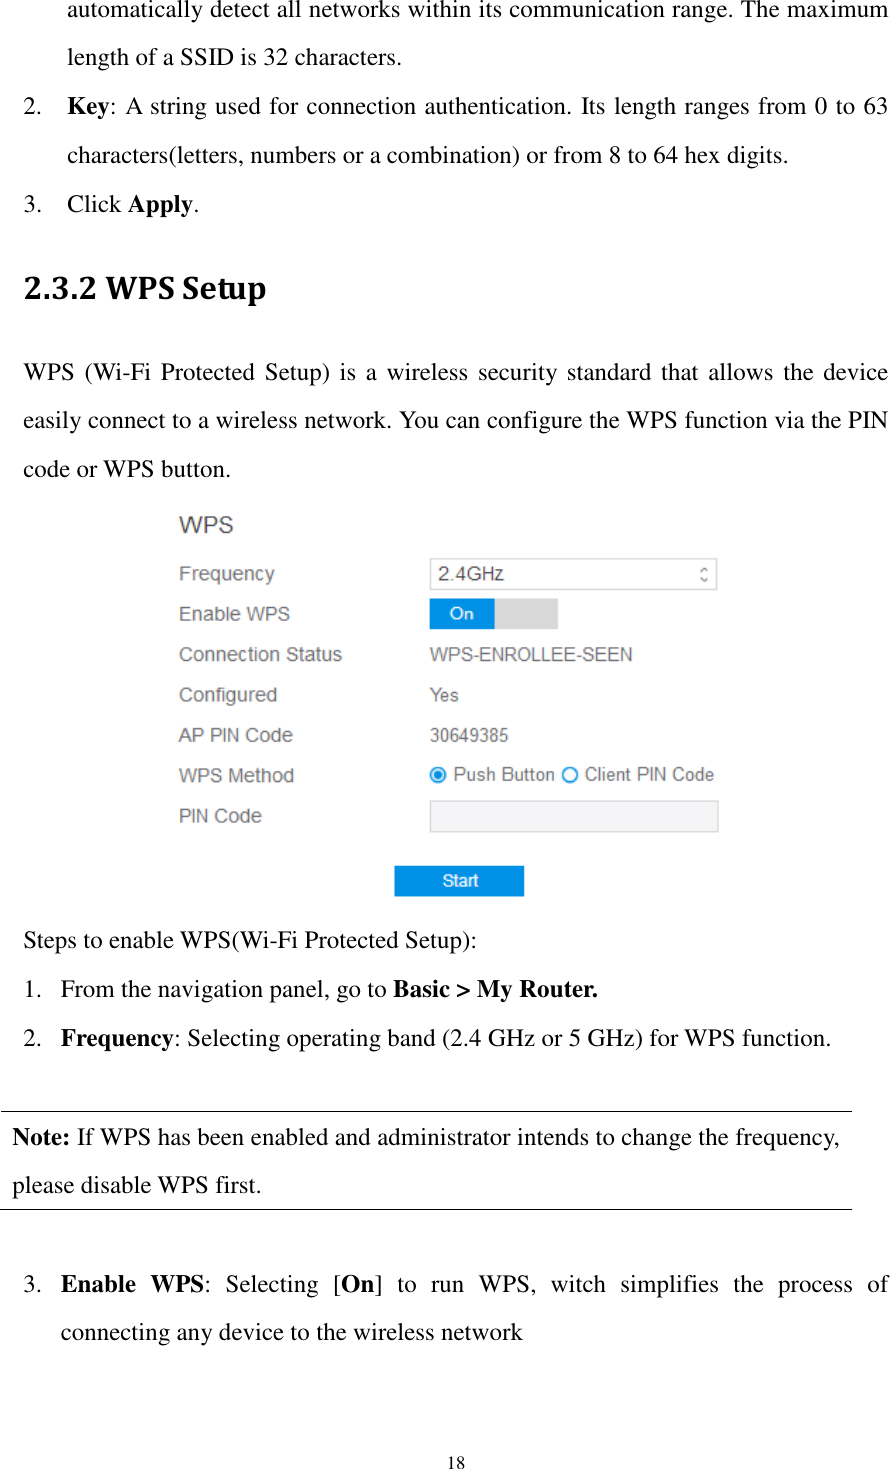  18 automatically detect all networks within its communication range. The maximum length of a SSID is 32 characters. 2. Key: A string used for connection authentication. Its length ranges from 0 to 63   characters(letters, numbers or a combination) or from 8 to 64 hex digits.   3. Click Apply. 2.3.2 WPS Setup WPS (Wi-Fi Protected Setup) is a wireless security standard that allows  the device easily connect to a wireless network. You can configure the WPS function via the PIN code or WPS button.    Steps to enable WPS(Wi-Fi Protected Setup):   1. From the navigation panel, go to Basic &gt; My Router. 2. Frequency: Selecting operating band (2.4 GHz or 5 GHz) for WPS function.    Note: If WPS has been enabled and administrator intends to change the frequency, please disable WPS first.  3. Enable  WPS:  Selecting  [On]  to  run  WPS,  witch  simplifies  the  process  of connecting any device to the wireless network  